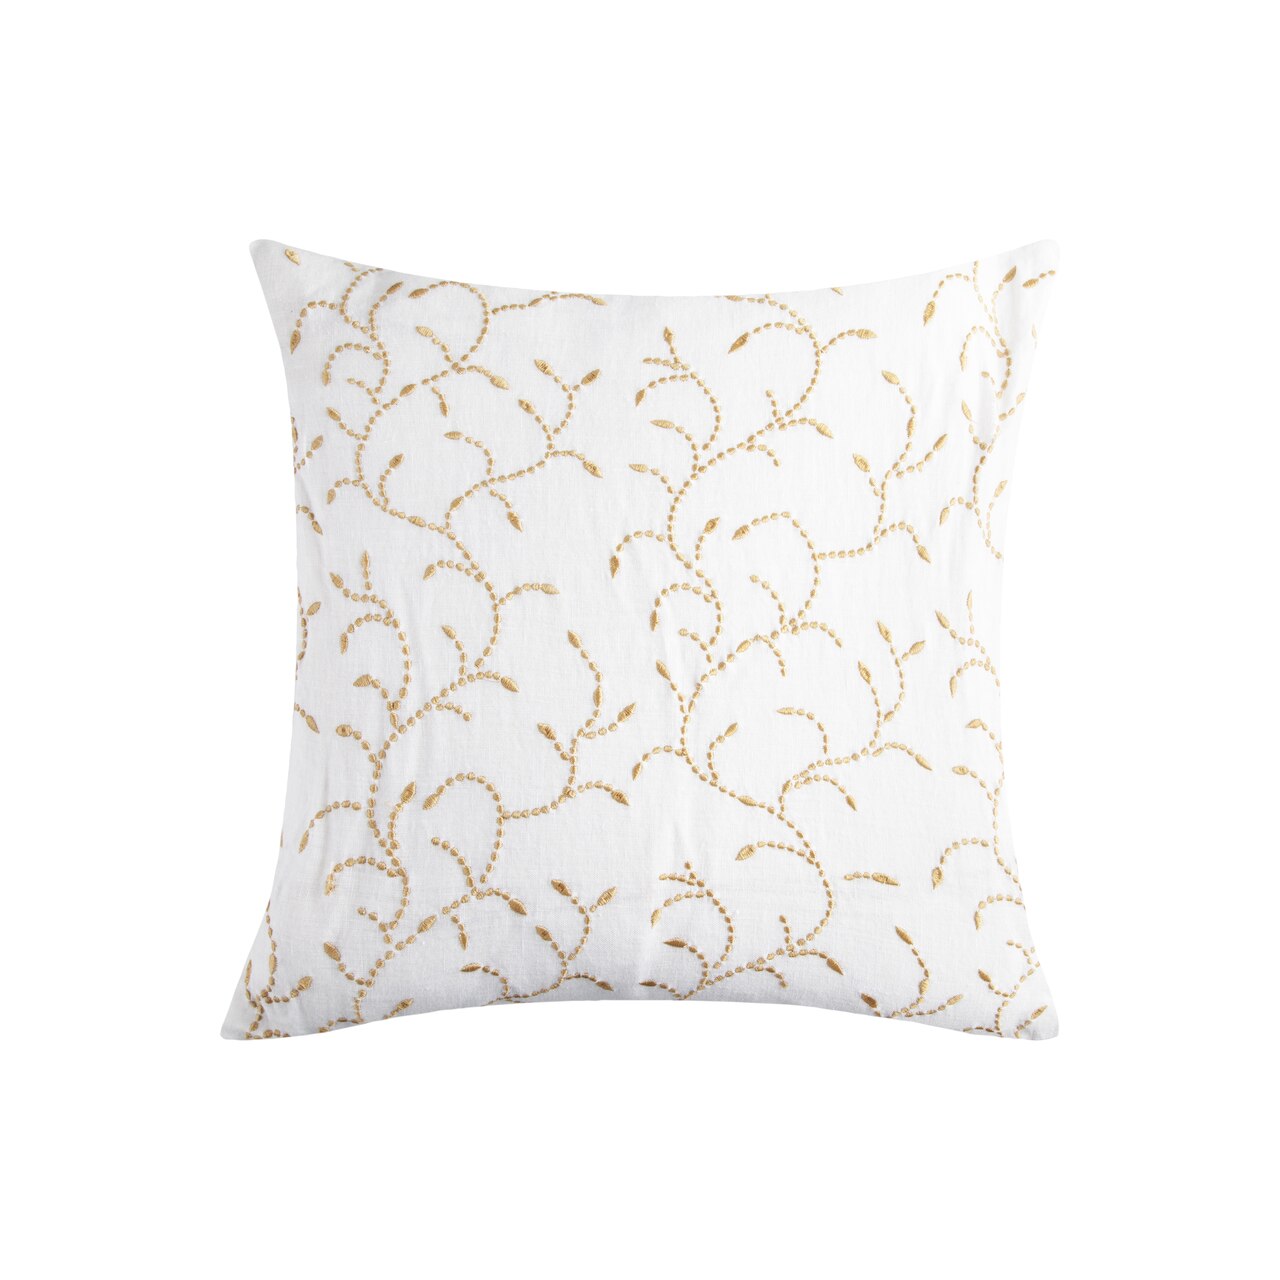 Ernst White Embroidered Cushion Cover